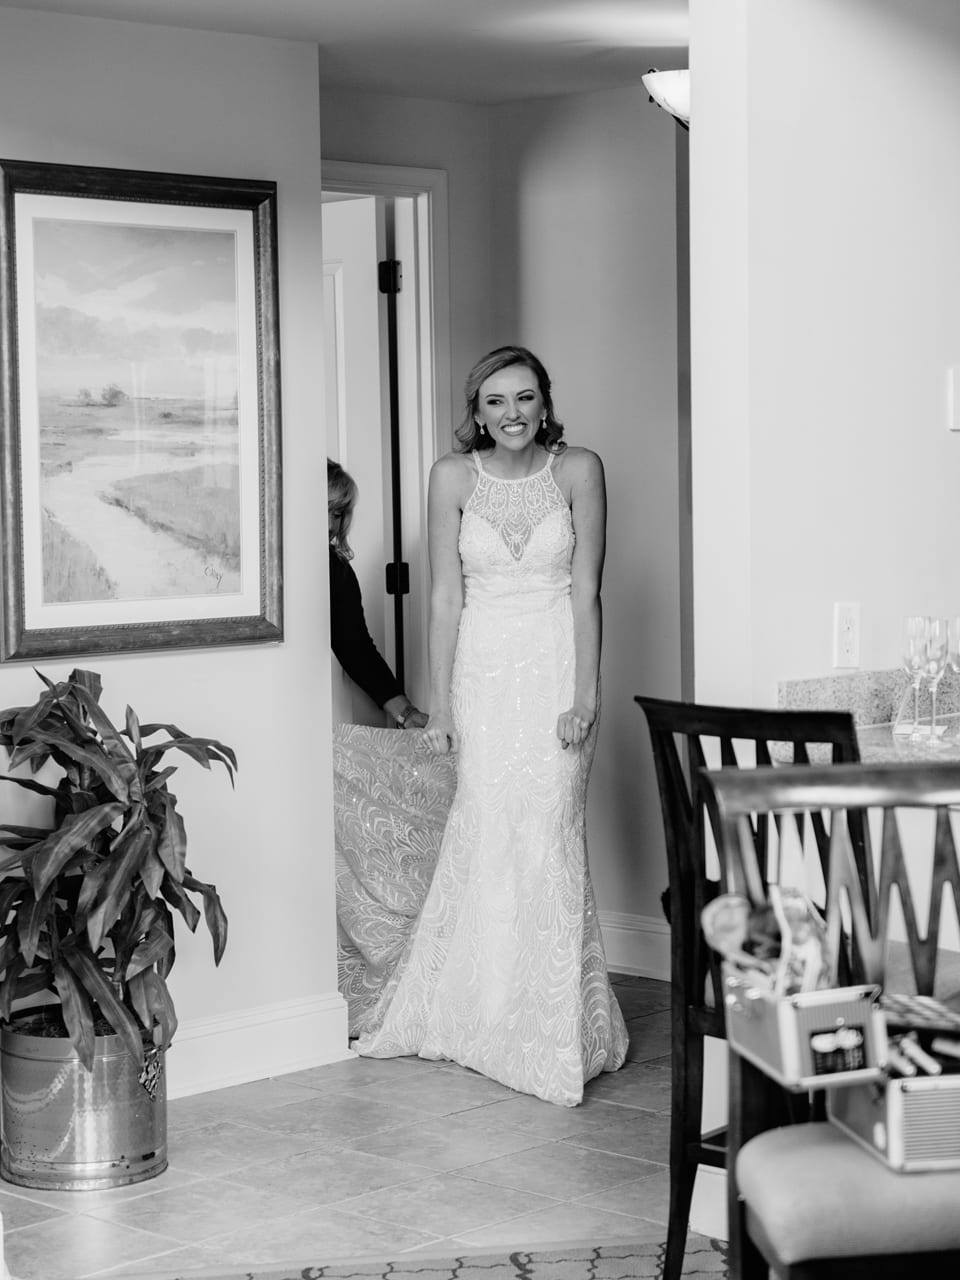 South Carolina Wedding at The Dunes Golf and Beach Club in Myrtle Beach by Pasha Belman Photographer